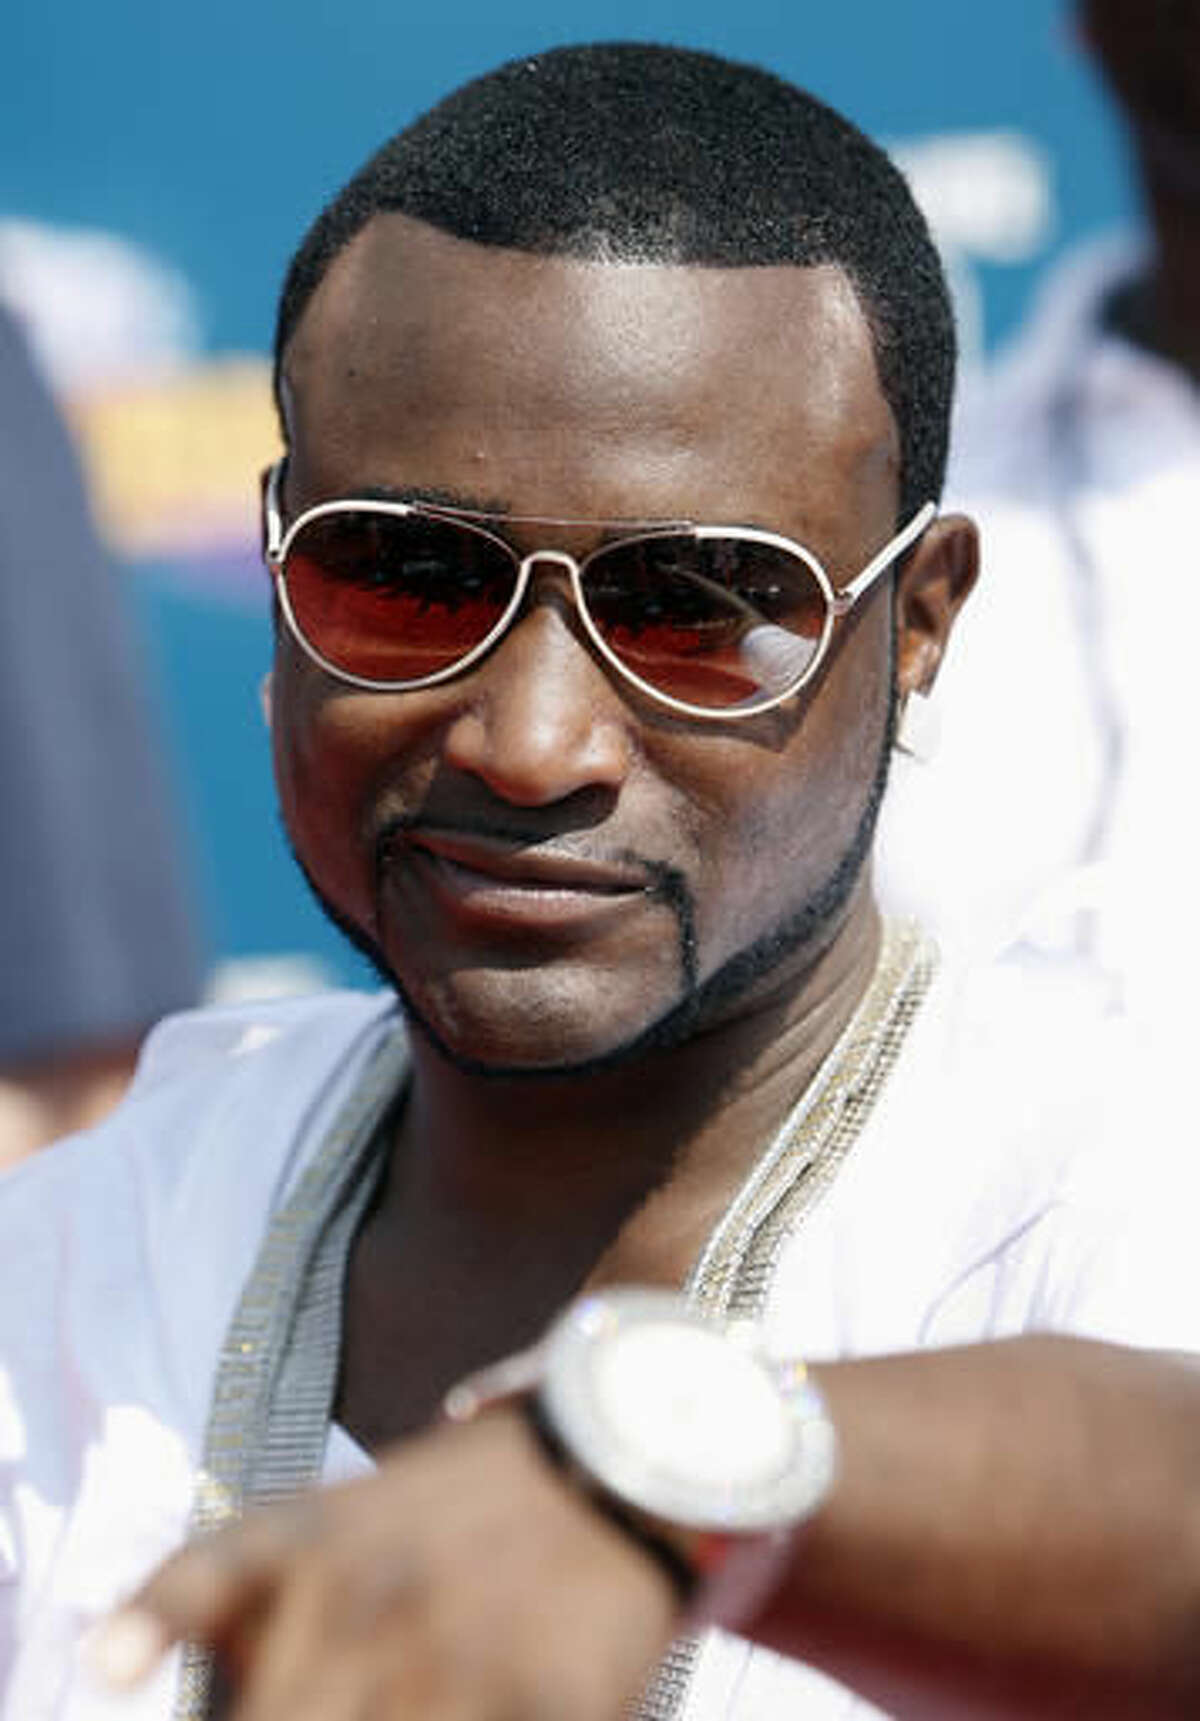 FILE- In this June 24, 2008 file photo, Shawty Lo arrives at the BET Awards in Los Angeles. Authorities say rapper Shawty Lo, whose real name is Carlos Walker, has been killed in a fiery car crash before dawn Wednesday, Sept. 21, 2016 on a freeway near southwest Atlanta. (AP Photo/Matt Sayles, File)